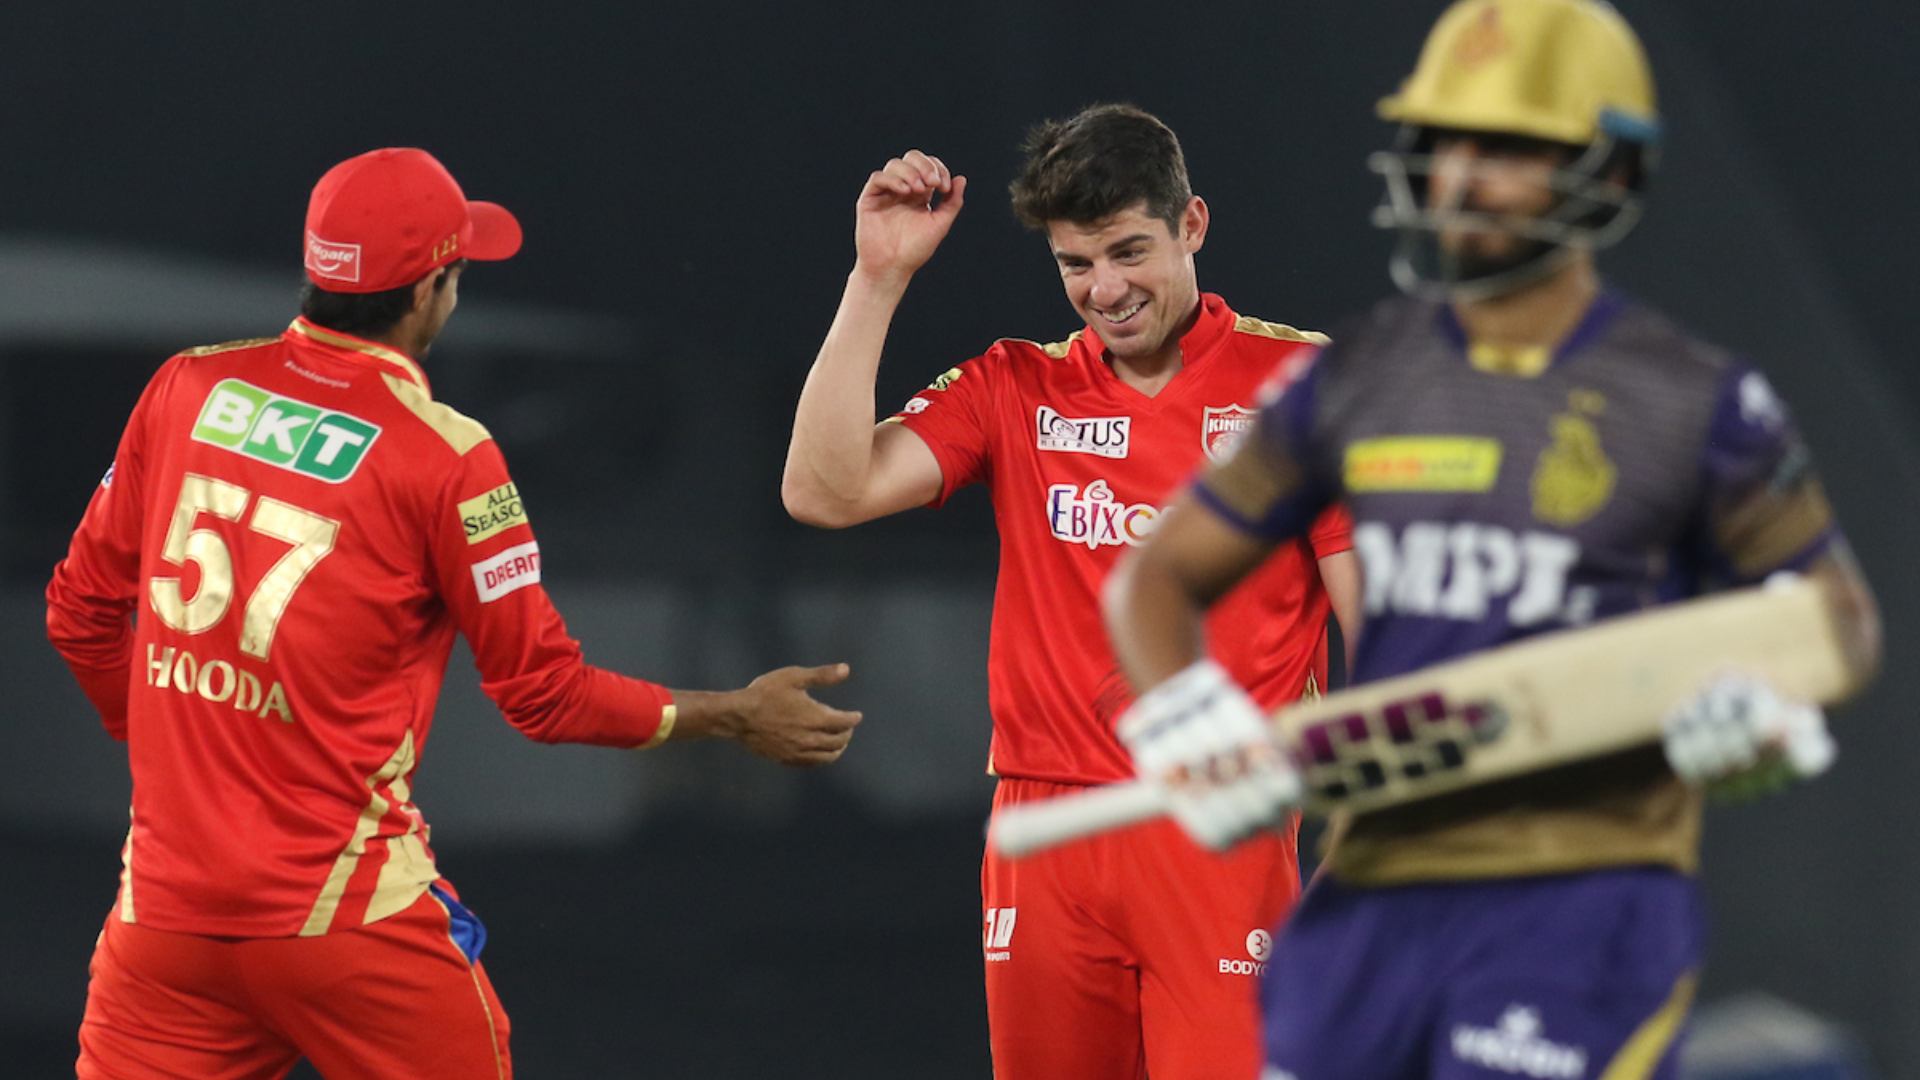 Punjab Kings put up a spirited display but suffered a five-wicket loss to Kolkata Knight Riders.